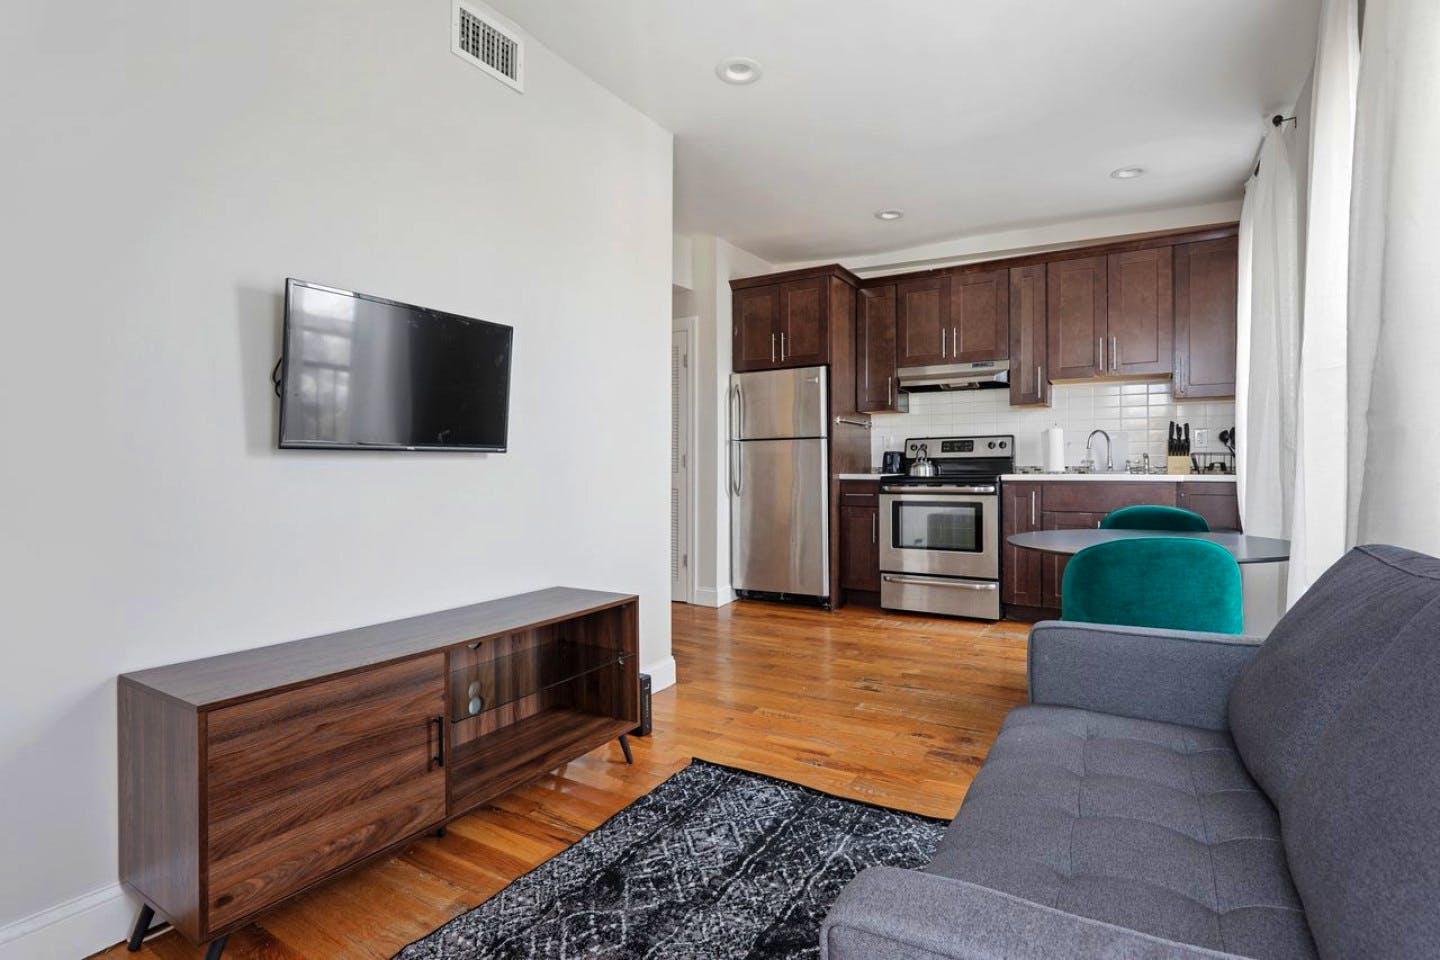 Outstanding Comfortable Apt. w/ Outdoow Views 1 block away from Kingston-Throop Avs Metro Station